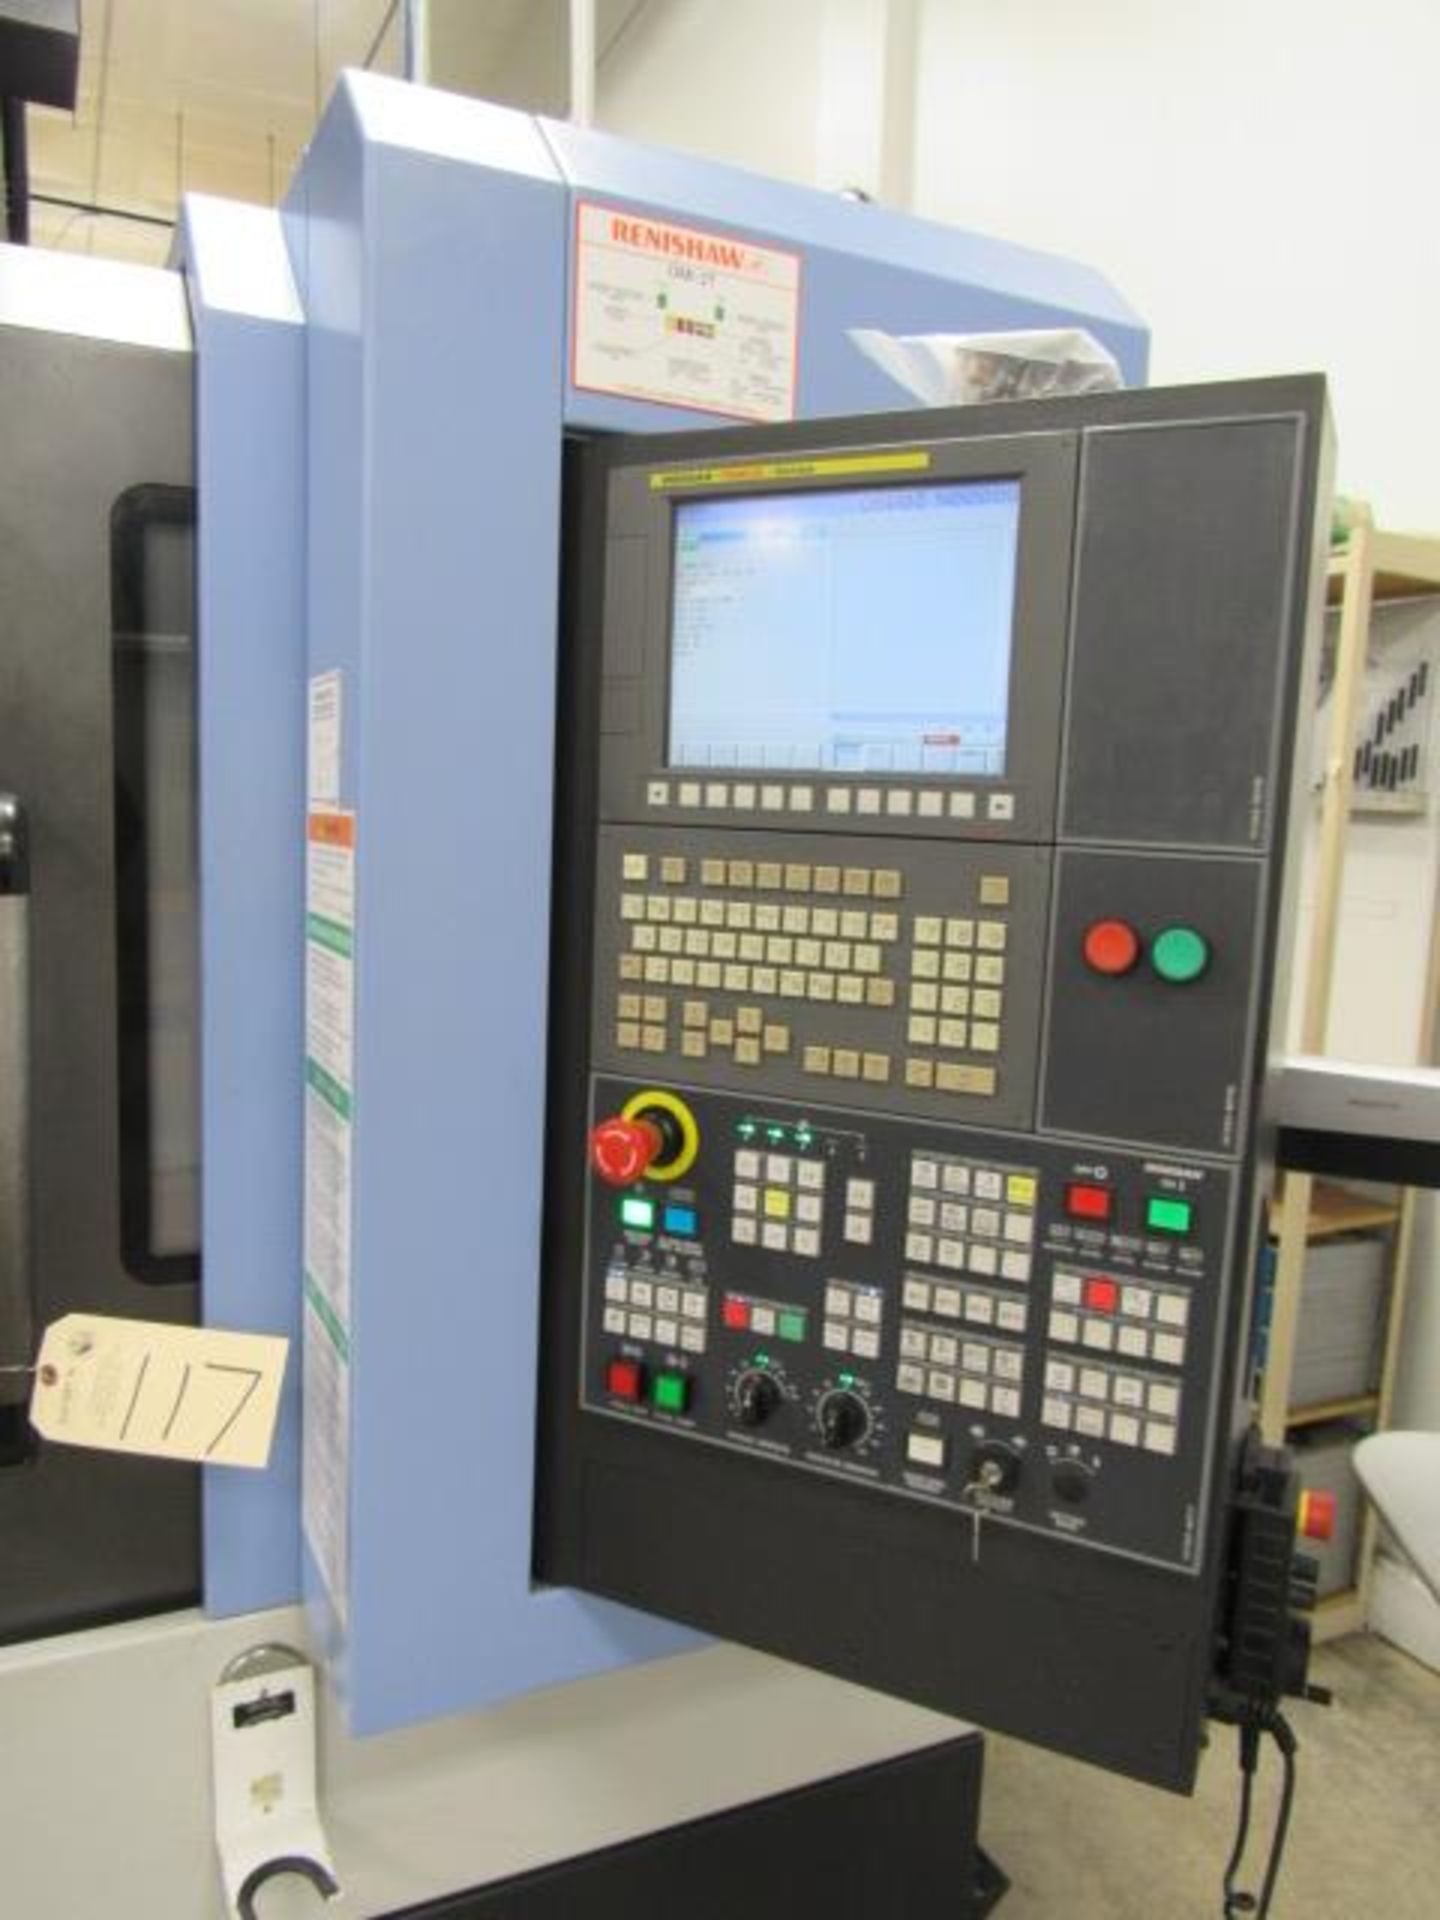 Doosan DNM 500 II CNC Vertical Machining Centers with 47.2'' x 21.2'' Tables, Big Plus #40, - Image 2 of 9